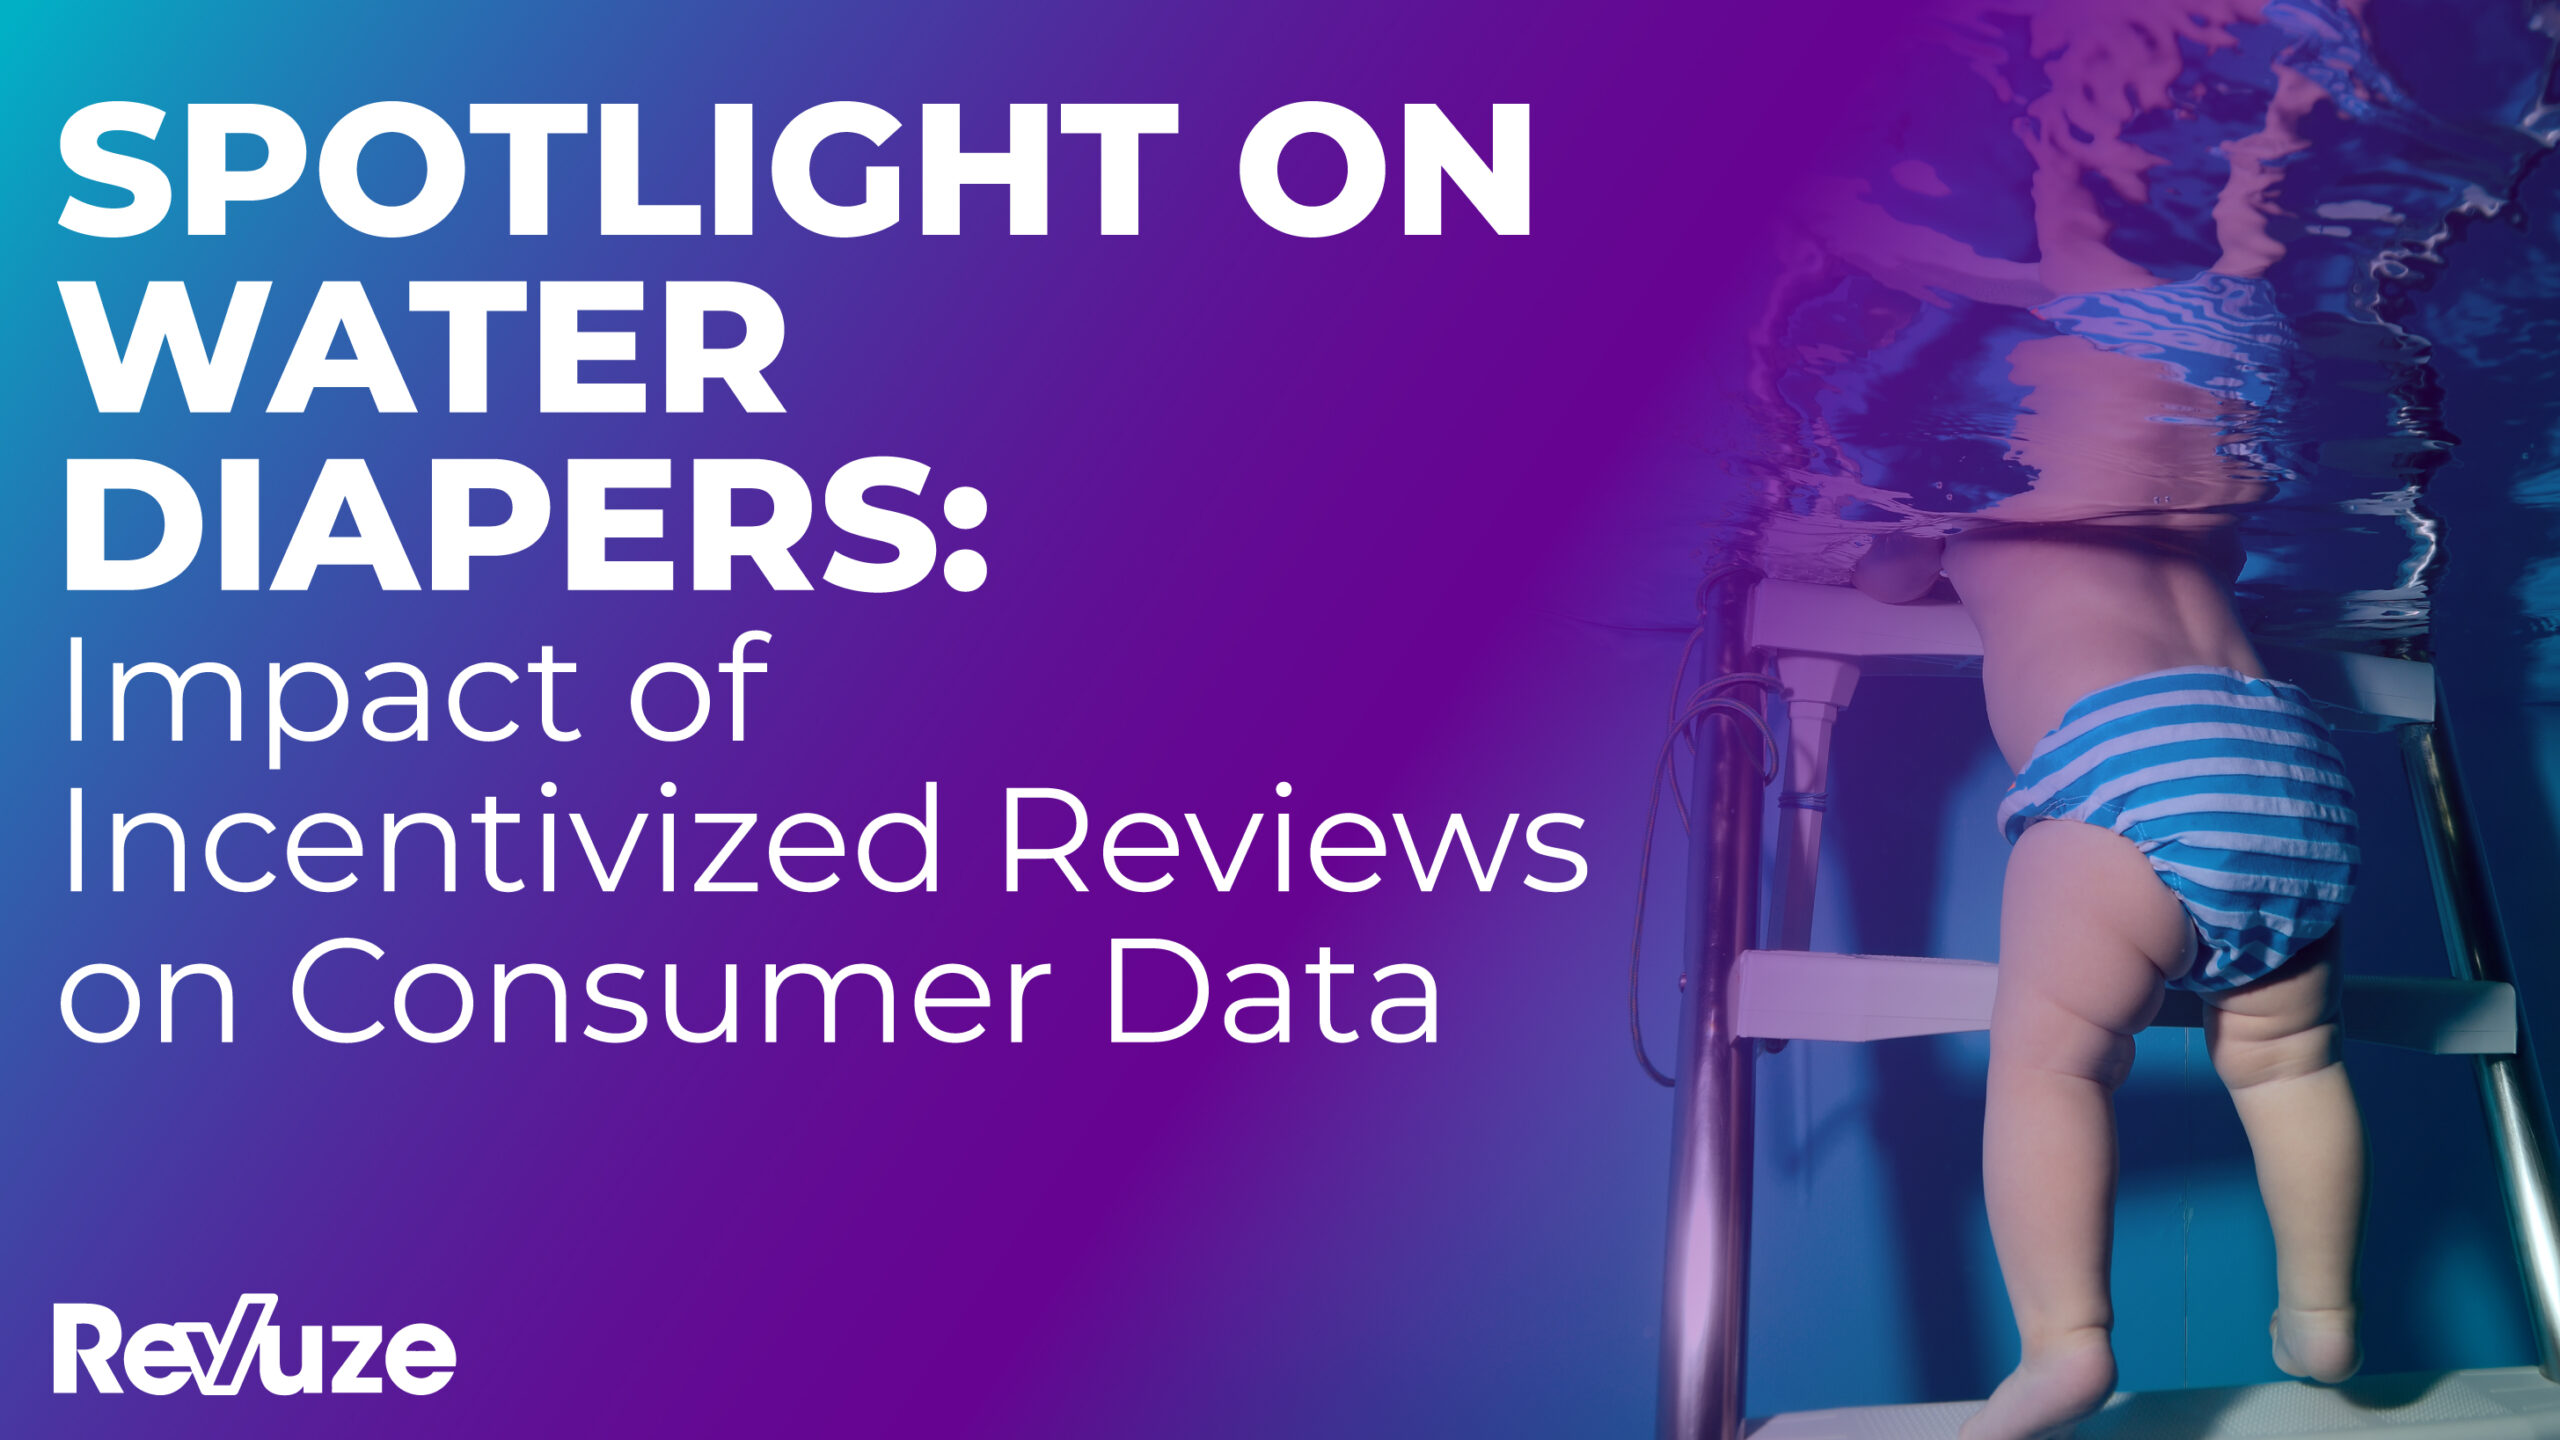 Spotlight on Water Diapers: Impact of incentivized reviews on consumer data